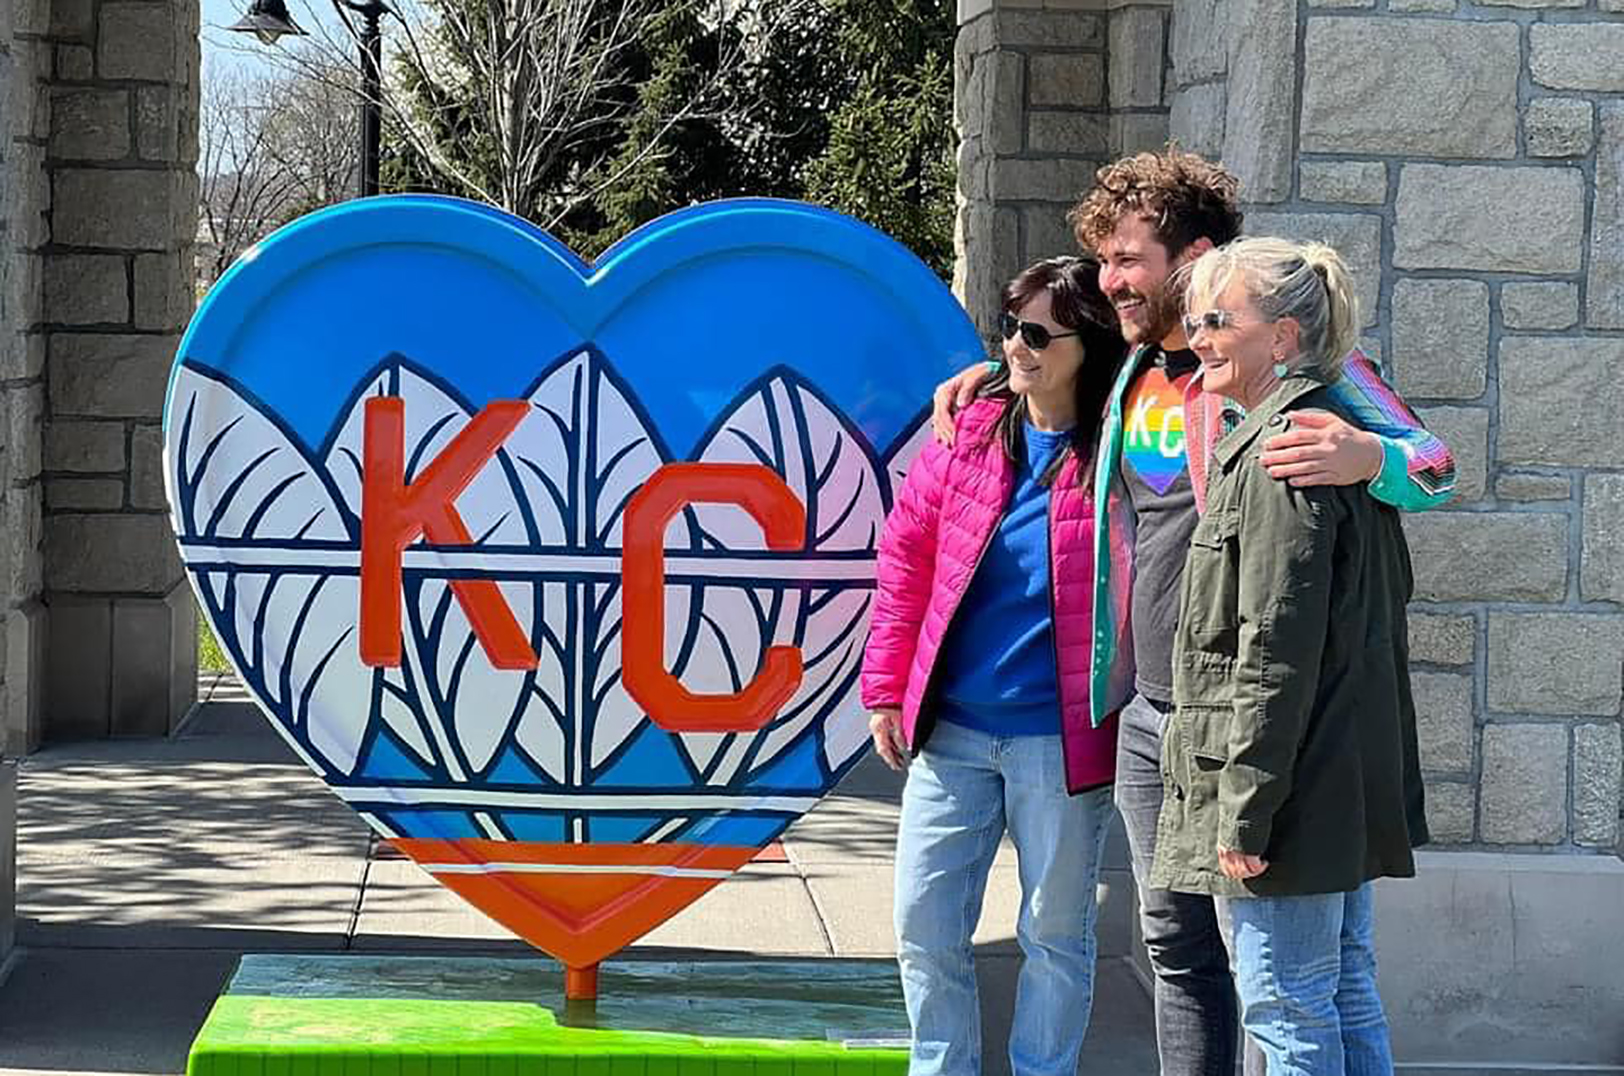 Miss KC’s Parade of Hearts? You’re in luck: Popular citywide art returning in 2023, 2024